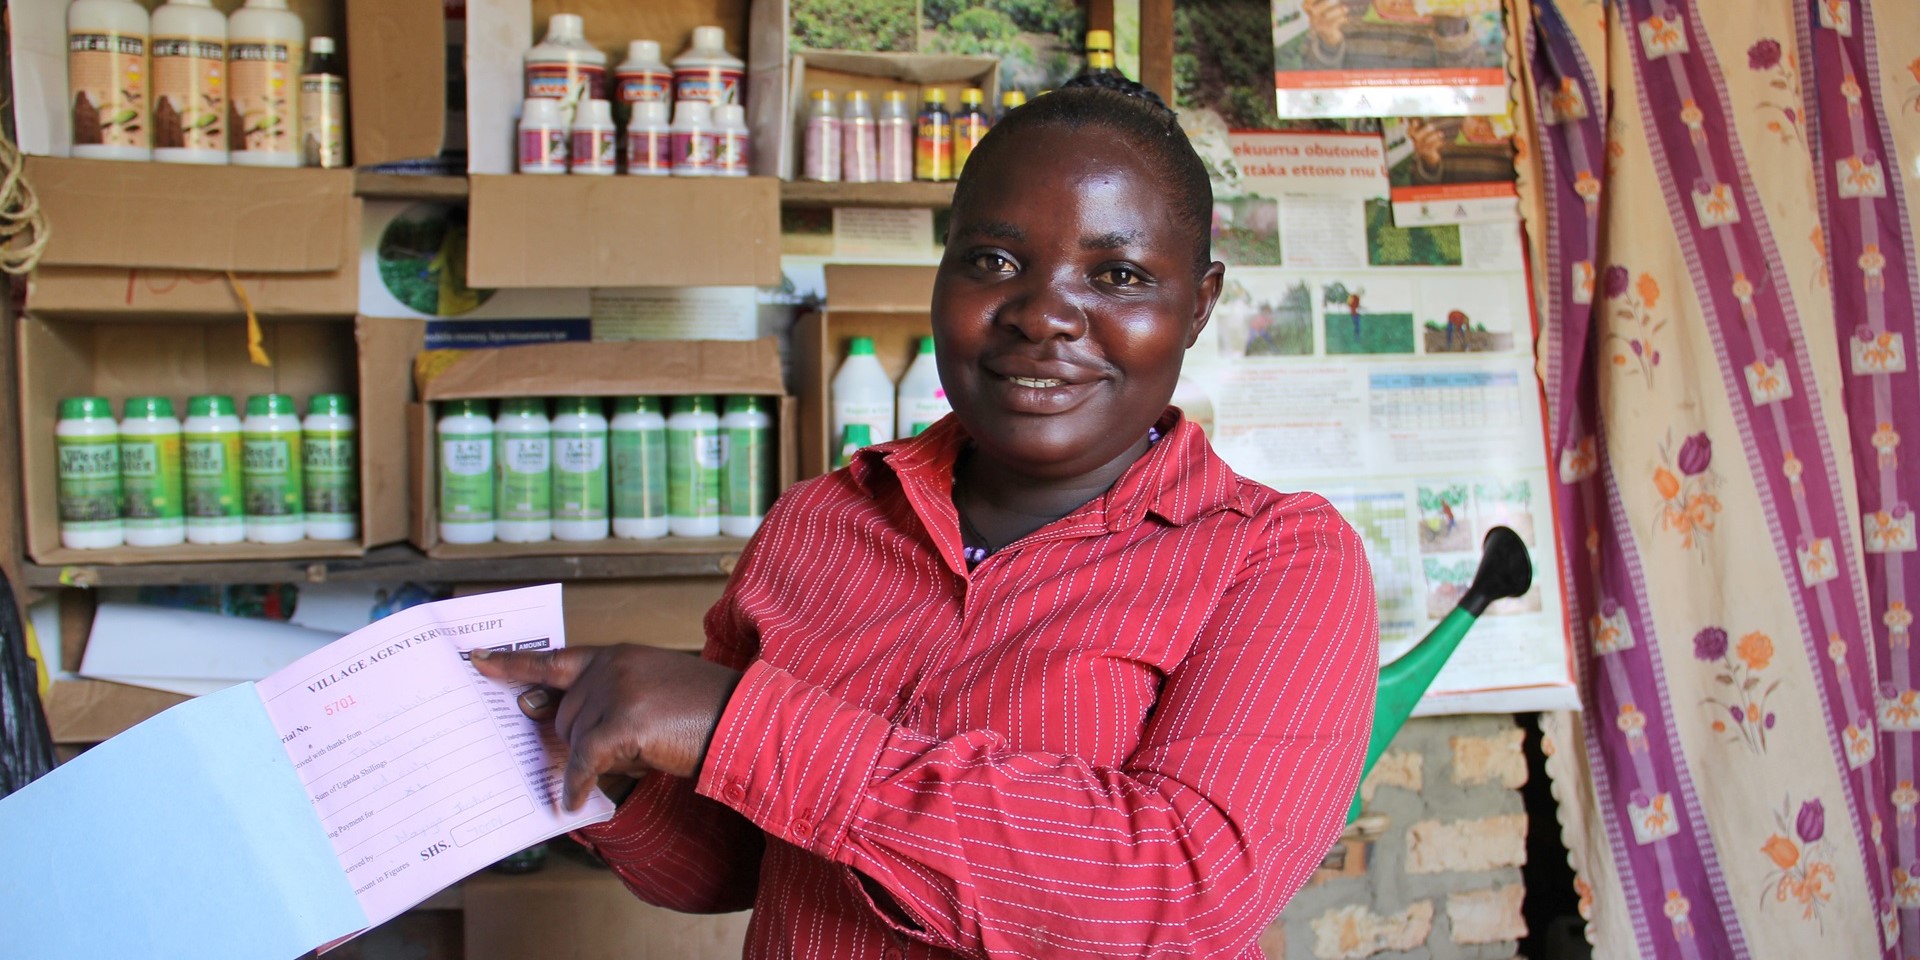 A woman in Uganda shows a receipt for services rendered inside her small business.